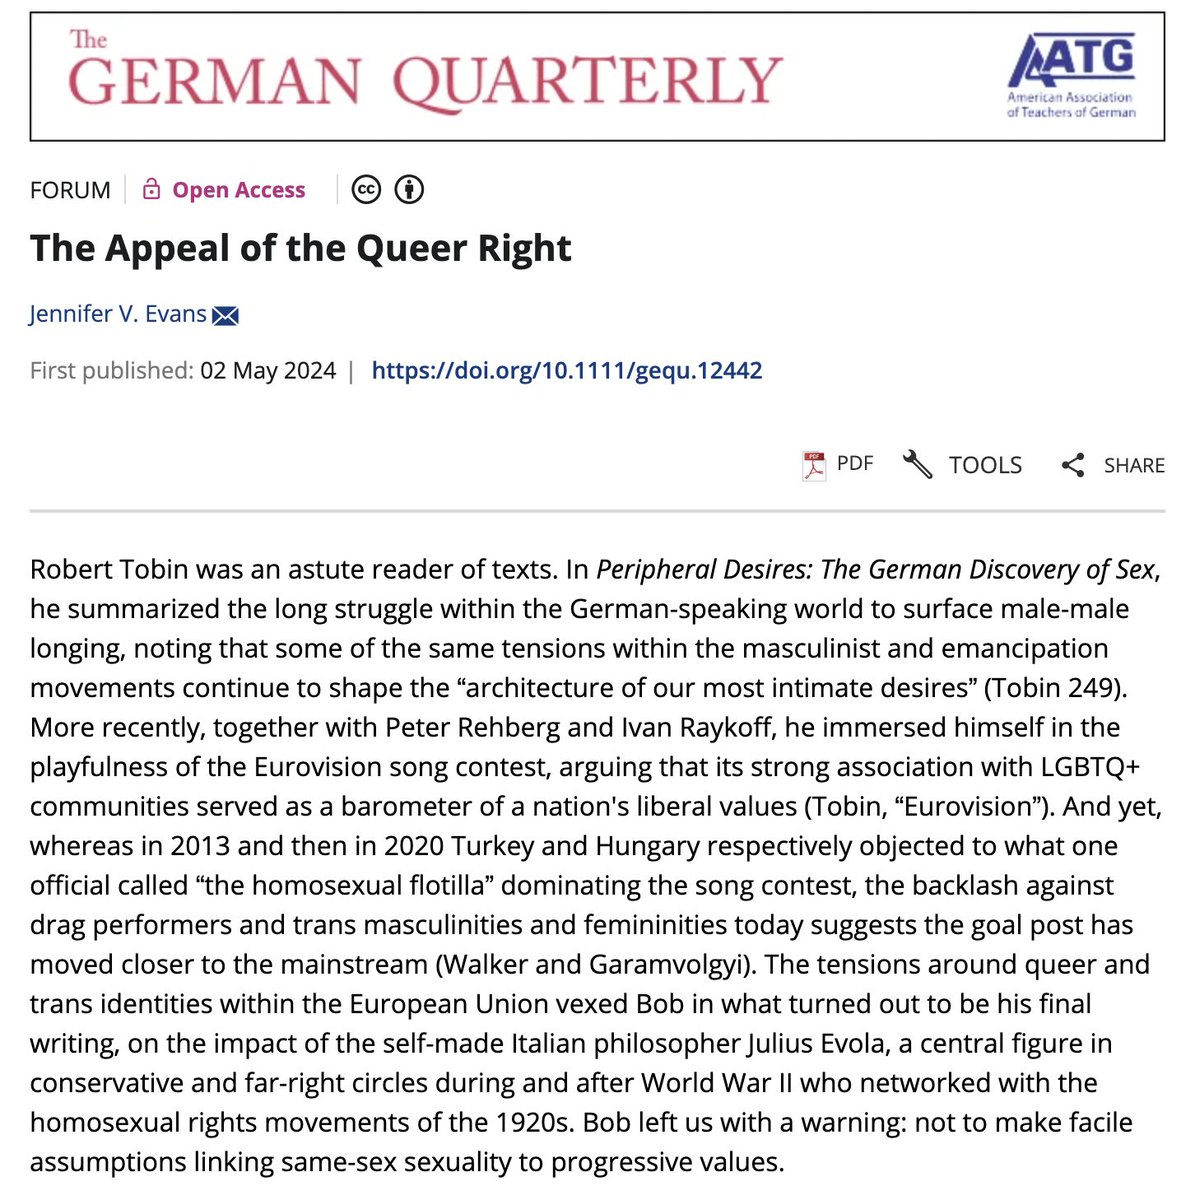 Proud to be included in a special forum on the life and work of Bob Tobin, a pioneer of German queer studies, gone too soon. I wrote about Julius Evola and the appeal of parts of the gays rights movement for today's far right. onlinelibrary.wiley.com/doi/10.1111/ge…